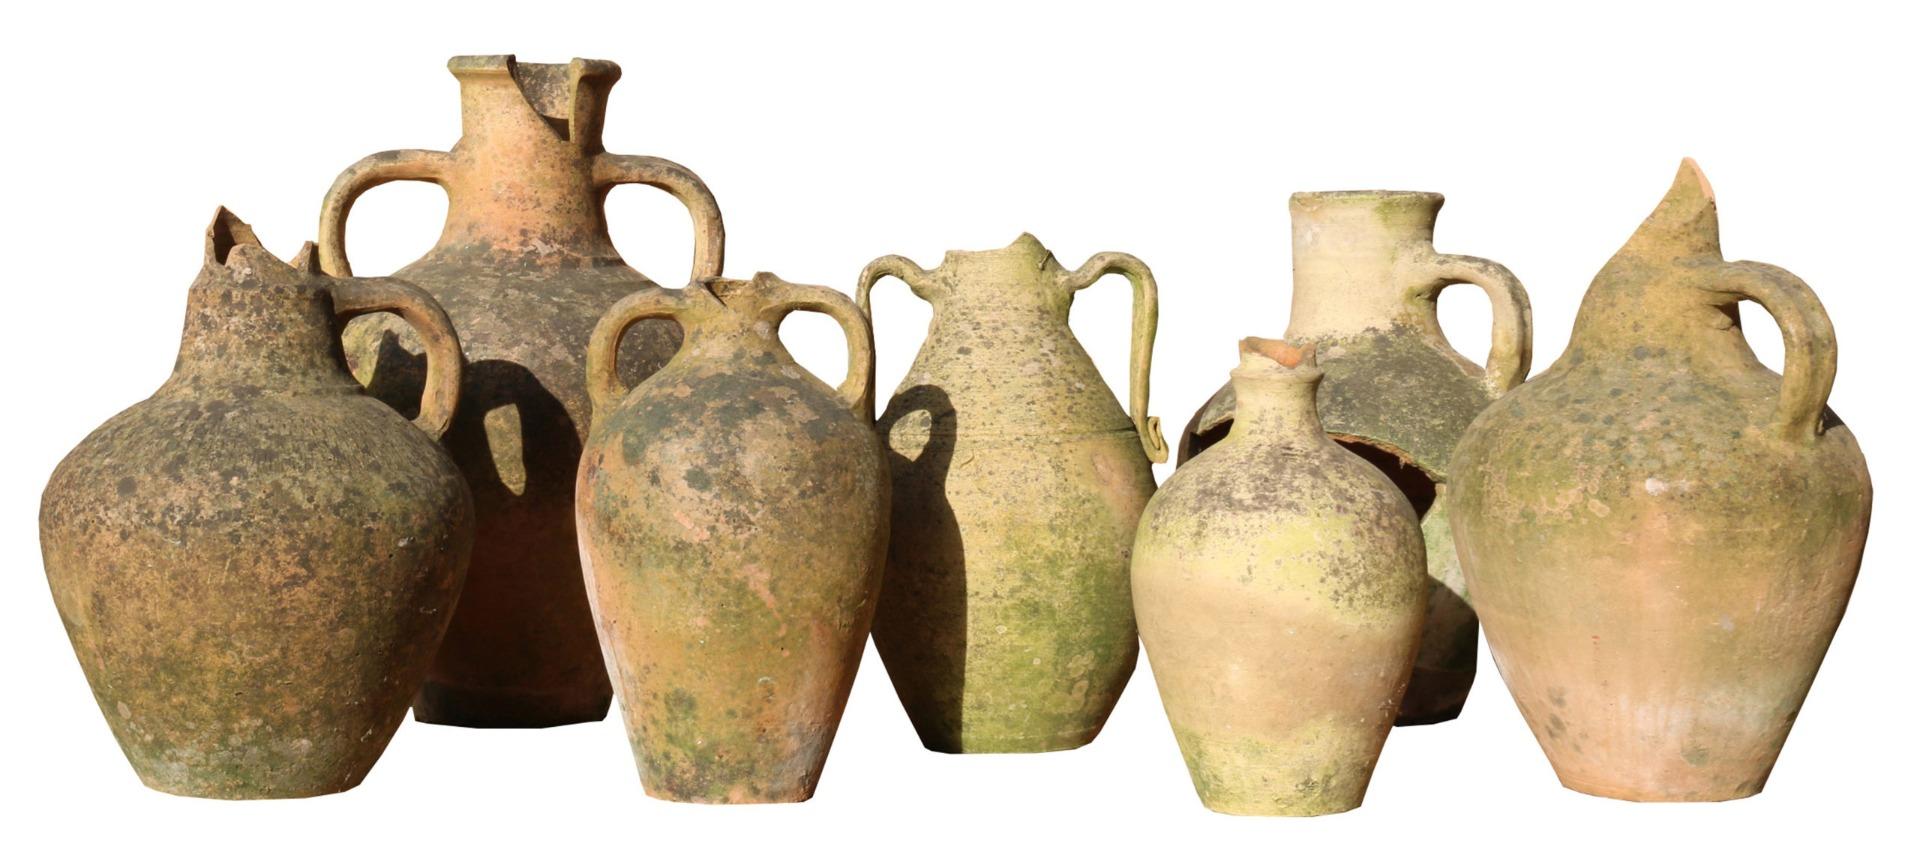 A collection of seven characterful weathered Mediterranean food storage or olive jars.

Measures: height (largest ) 45.5 cm to (smallest) 27.5 cm

diameter (largest) 28 cm (smallest) 17 cm approx.